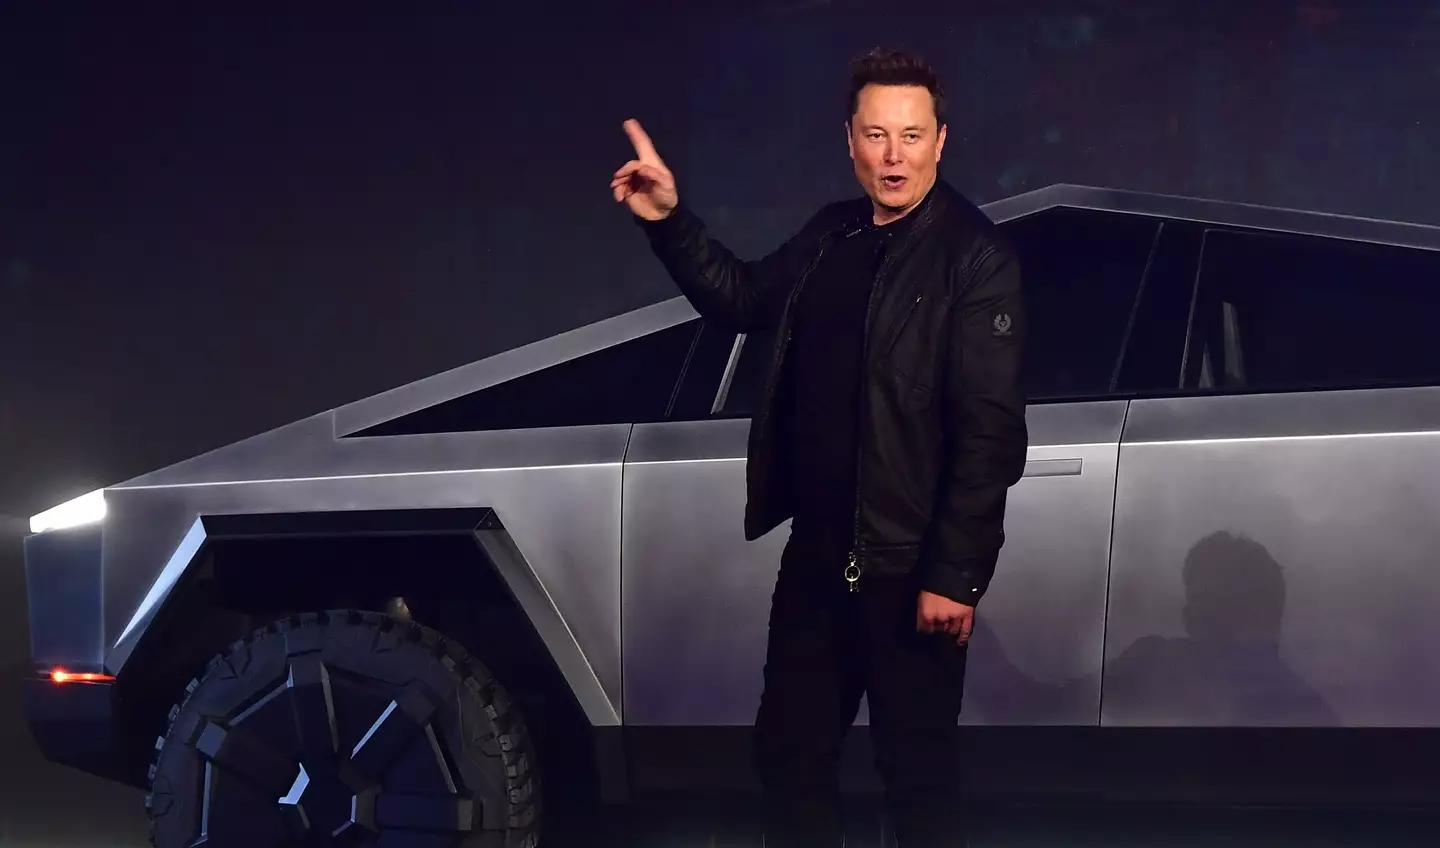 Elon Musk claimed the 'Cybertruck will be waterproof enough to serve briefly as a boat'.